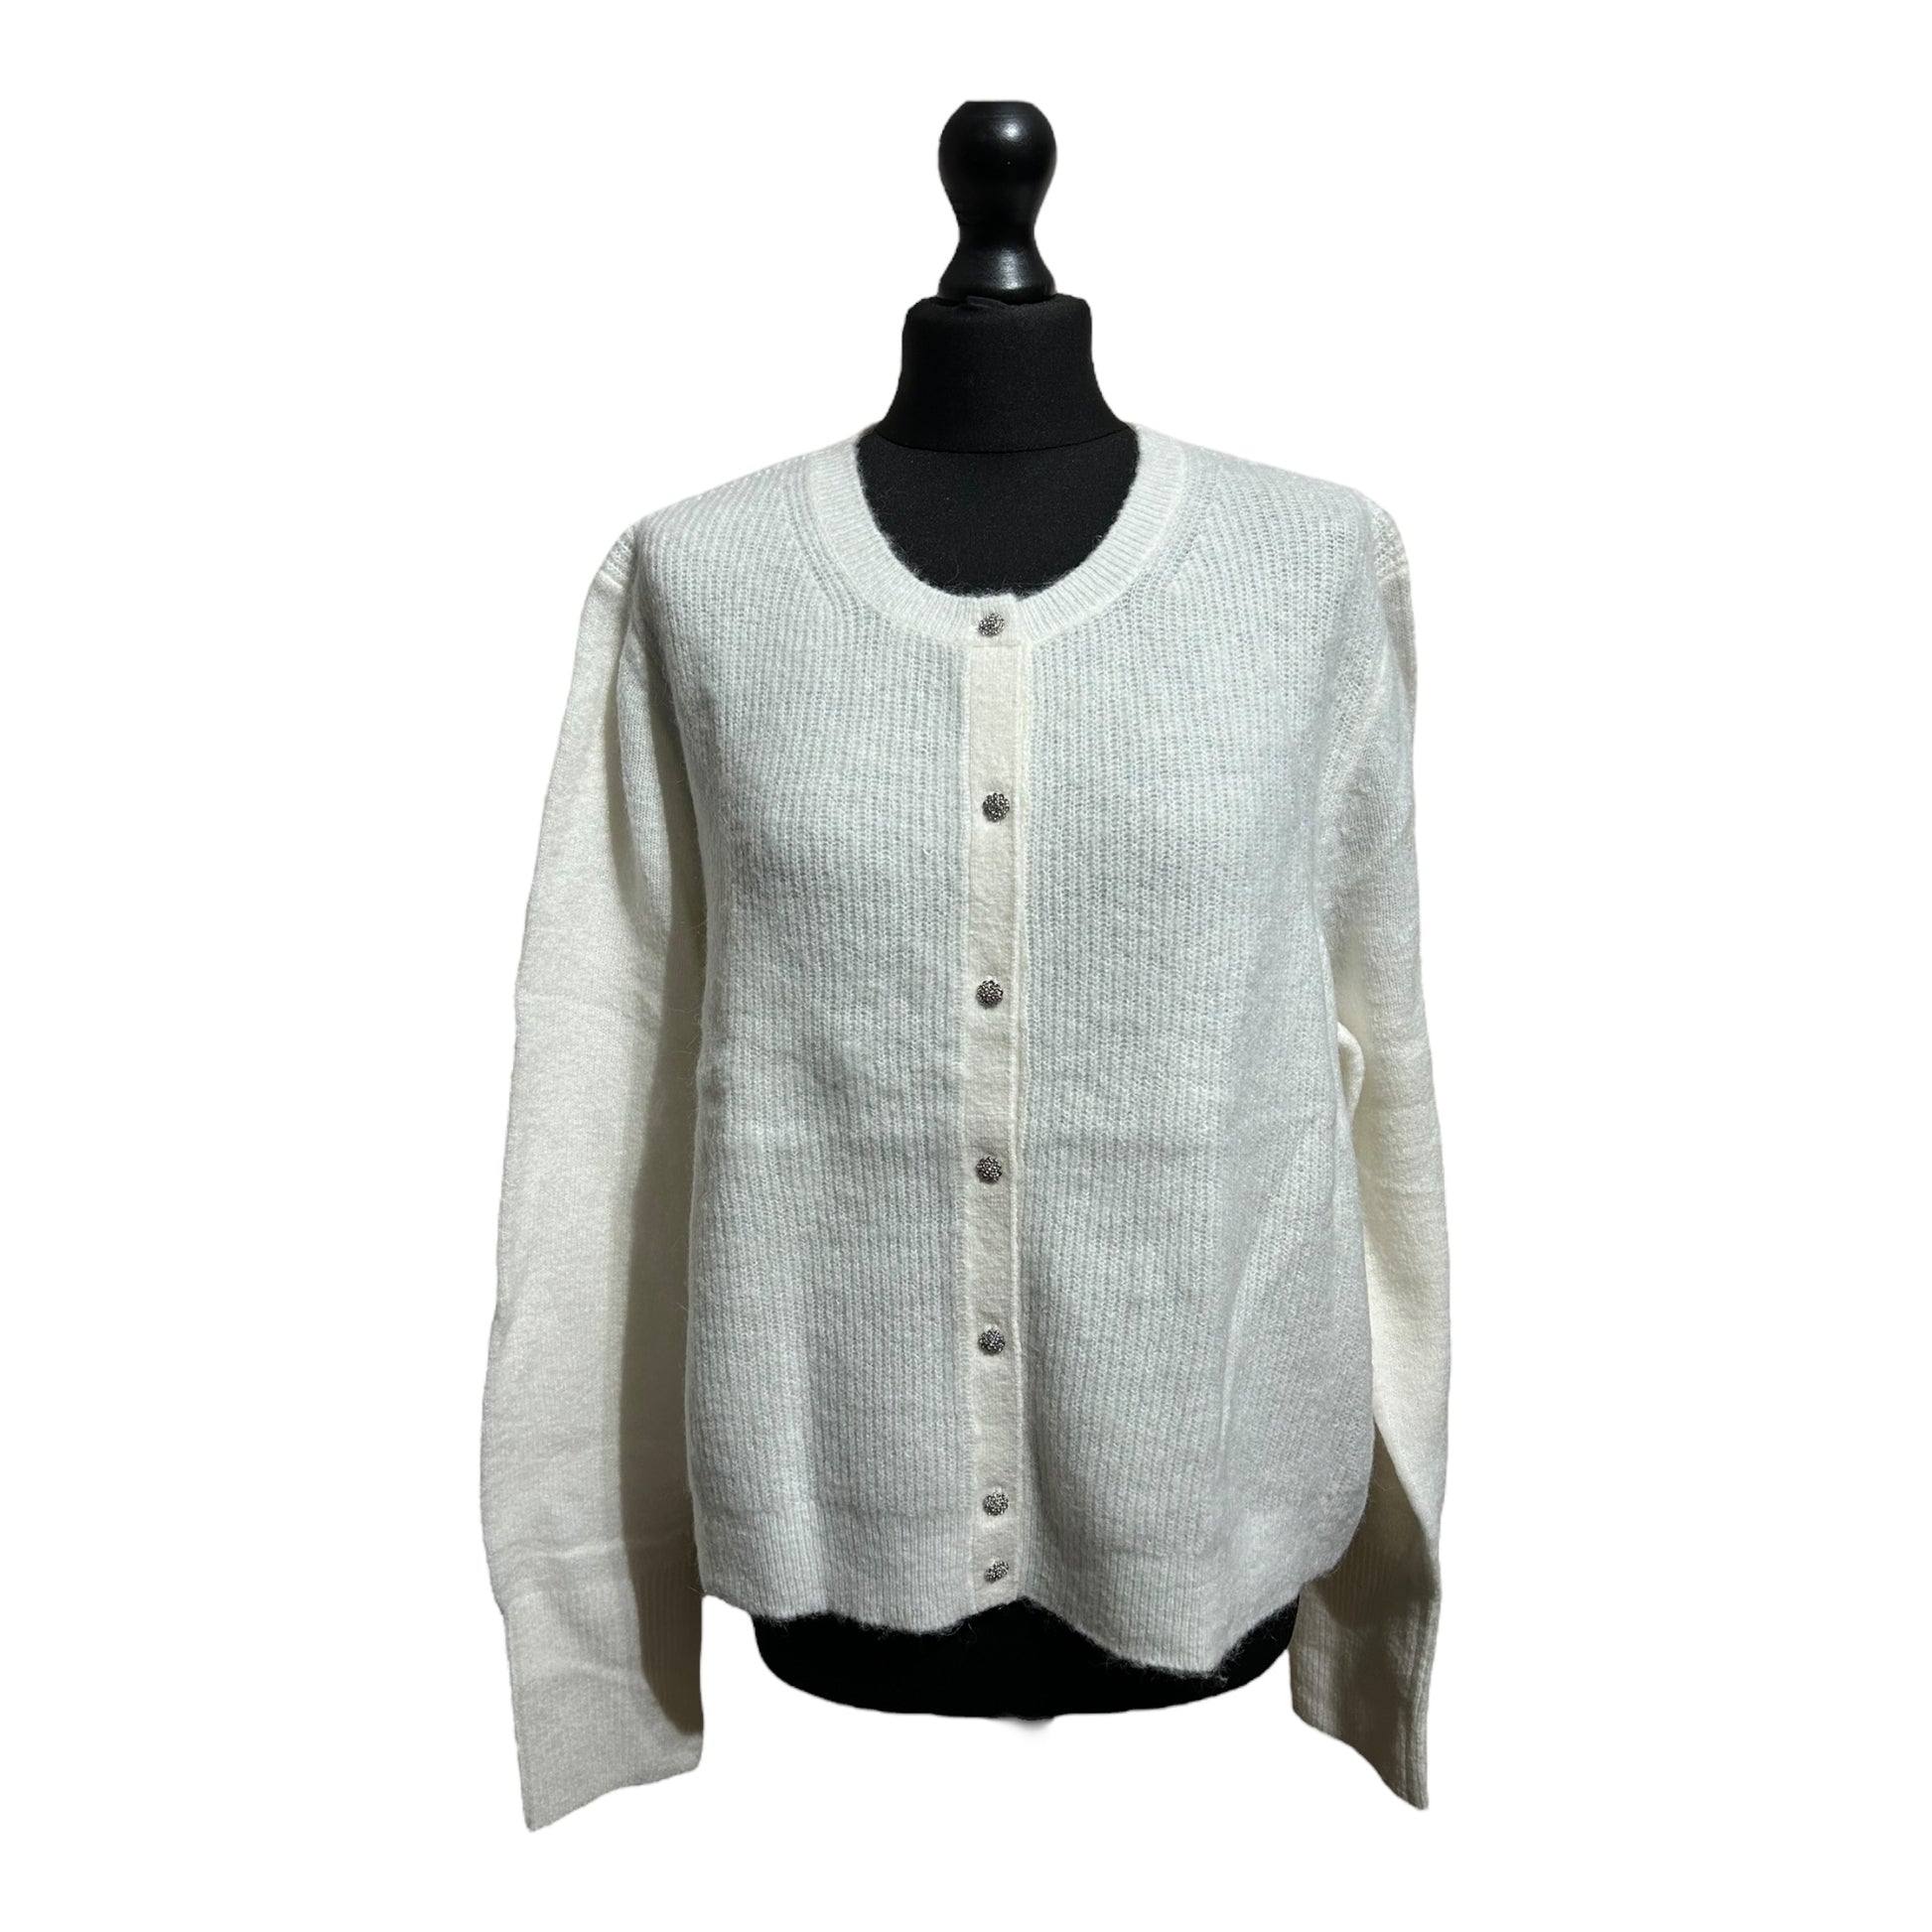 Boden Ivory Jewel Button Wool Blend Cardigan - Recurring.Life